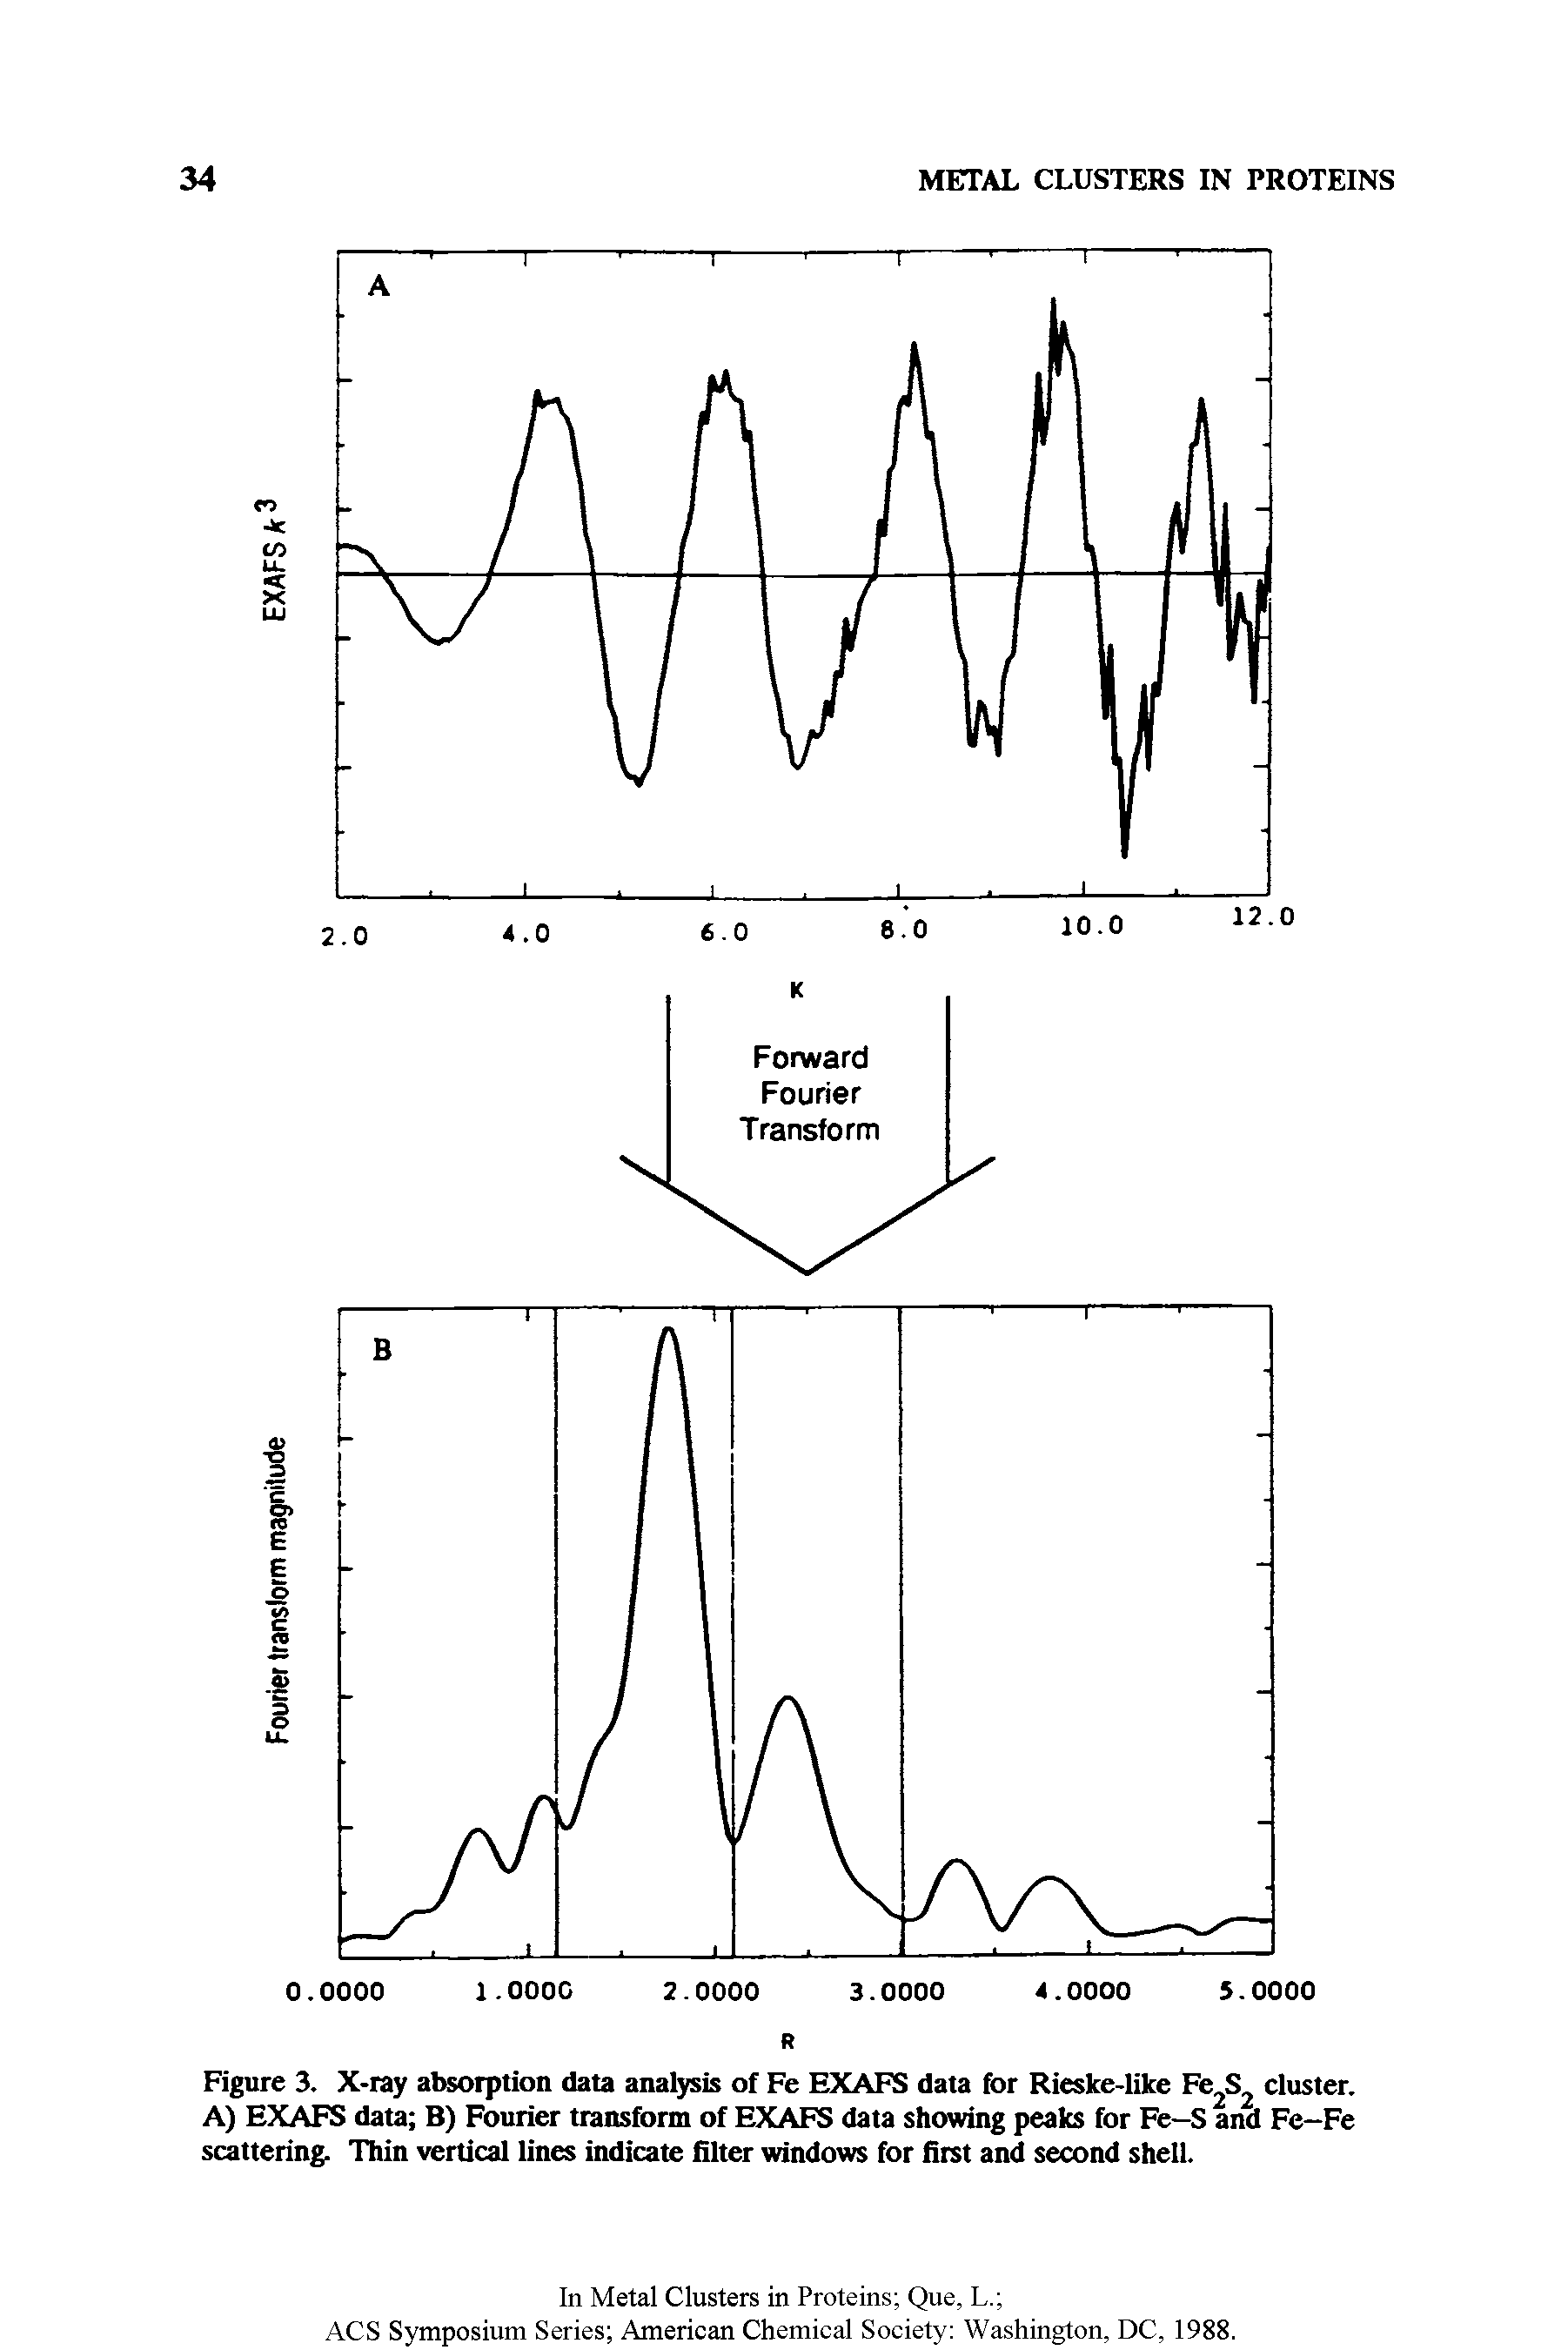 Figure 3. X-ray absorption data analysis of Fe EXAFS data for Rieske-like Fe S cluster. A) EXAFS data B) Fourier transform of EXAFS data showing peaks for Fe—S and Fe-Fe scattering. Thin vertical lines indicate filter windows for first and second shell.